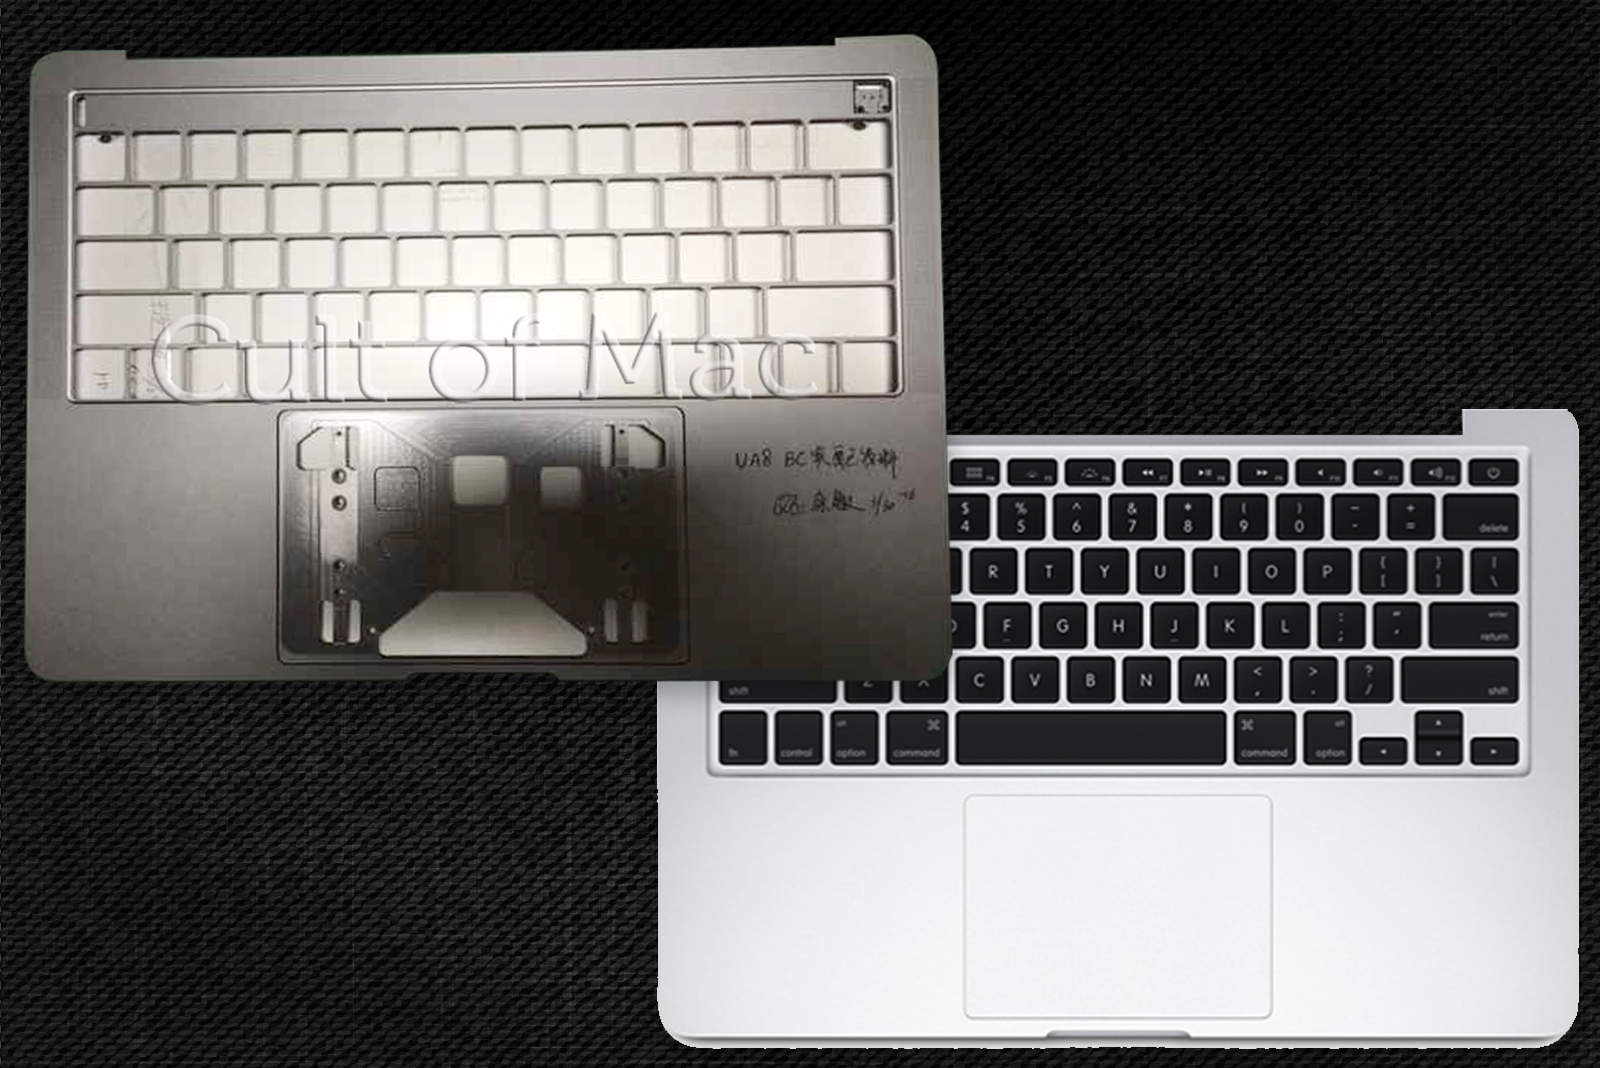 The new MacBook Pro vs the Old.